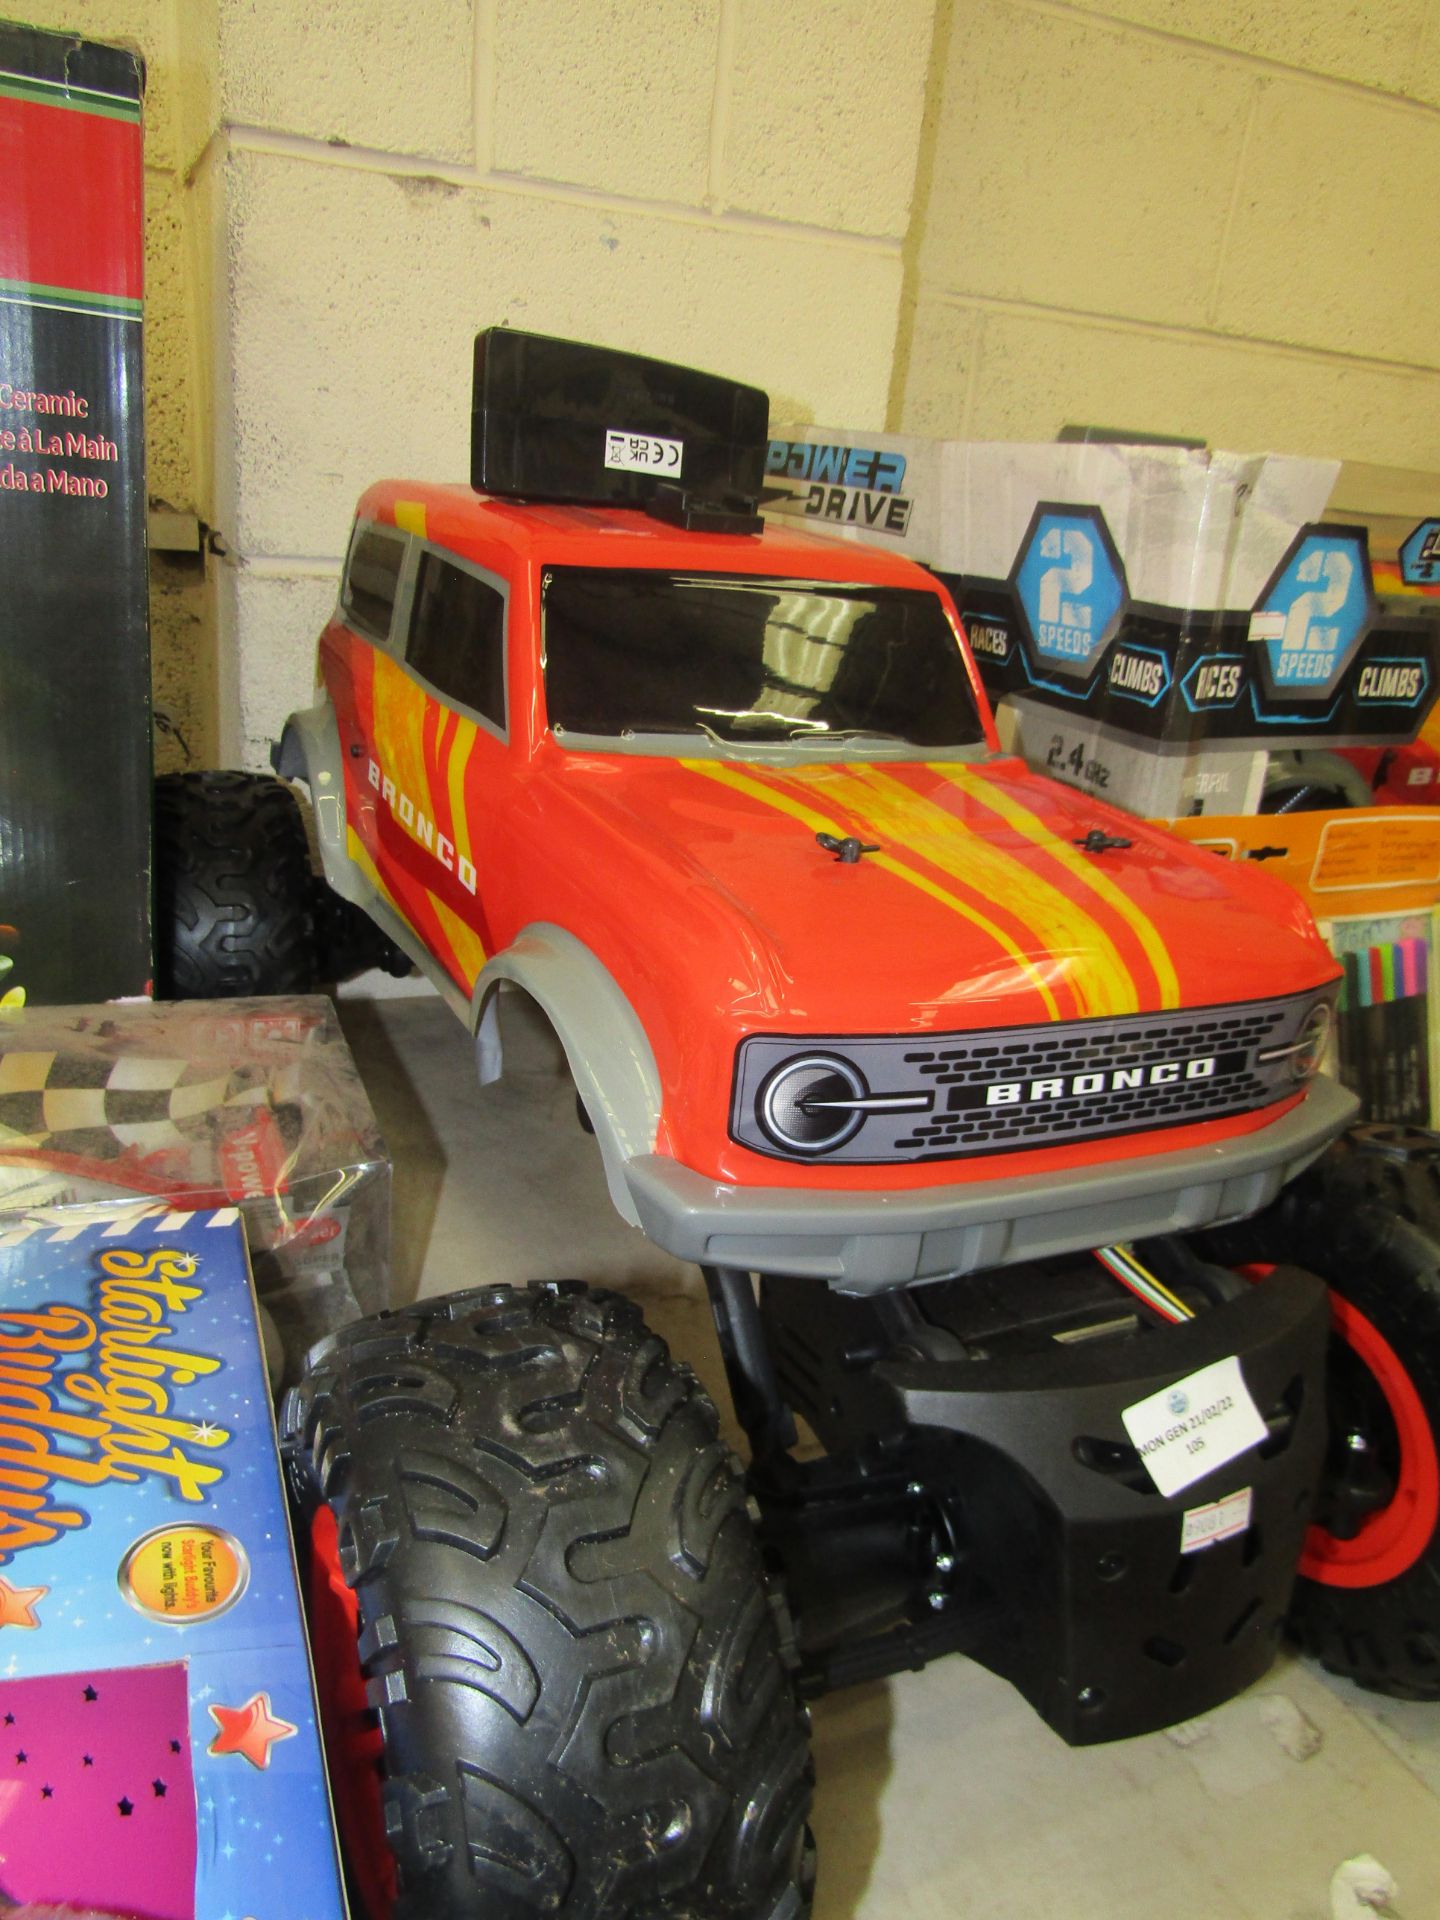 Ford Bronco - 4X4 Monster RC Monster Truck - Please Note, Plastic body Of Car Contains Damages -